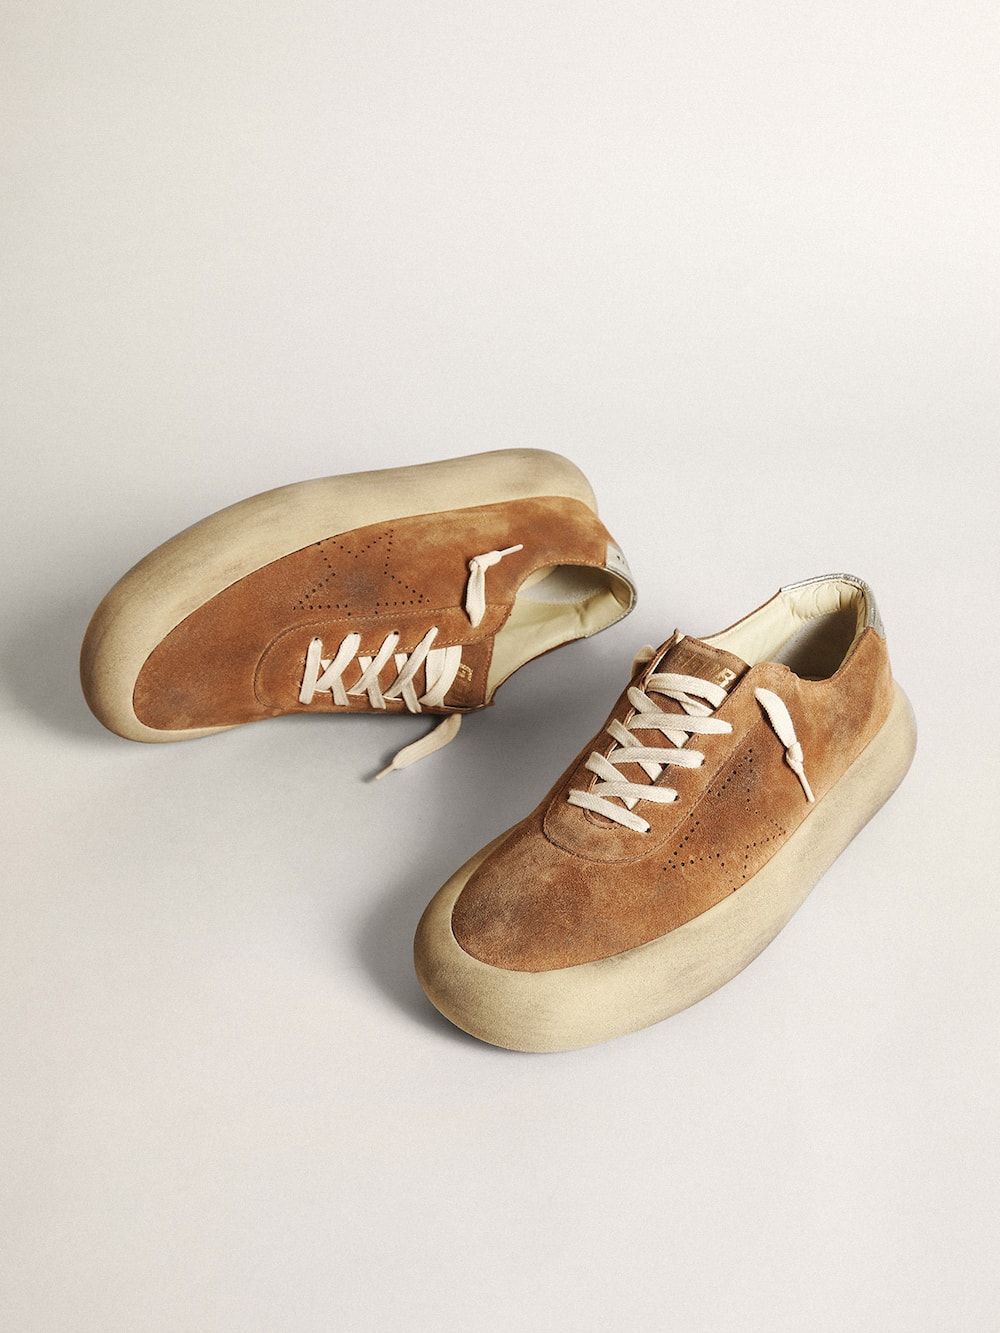 Golden Goose - Men's Space-Star in tobacco-colored suede in 